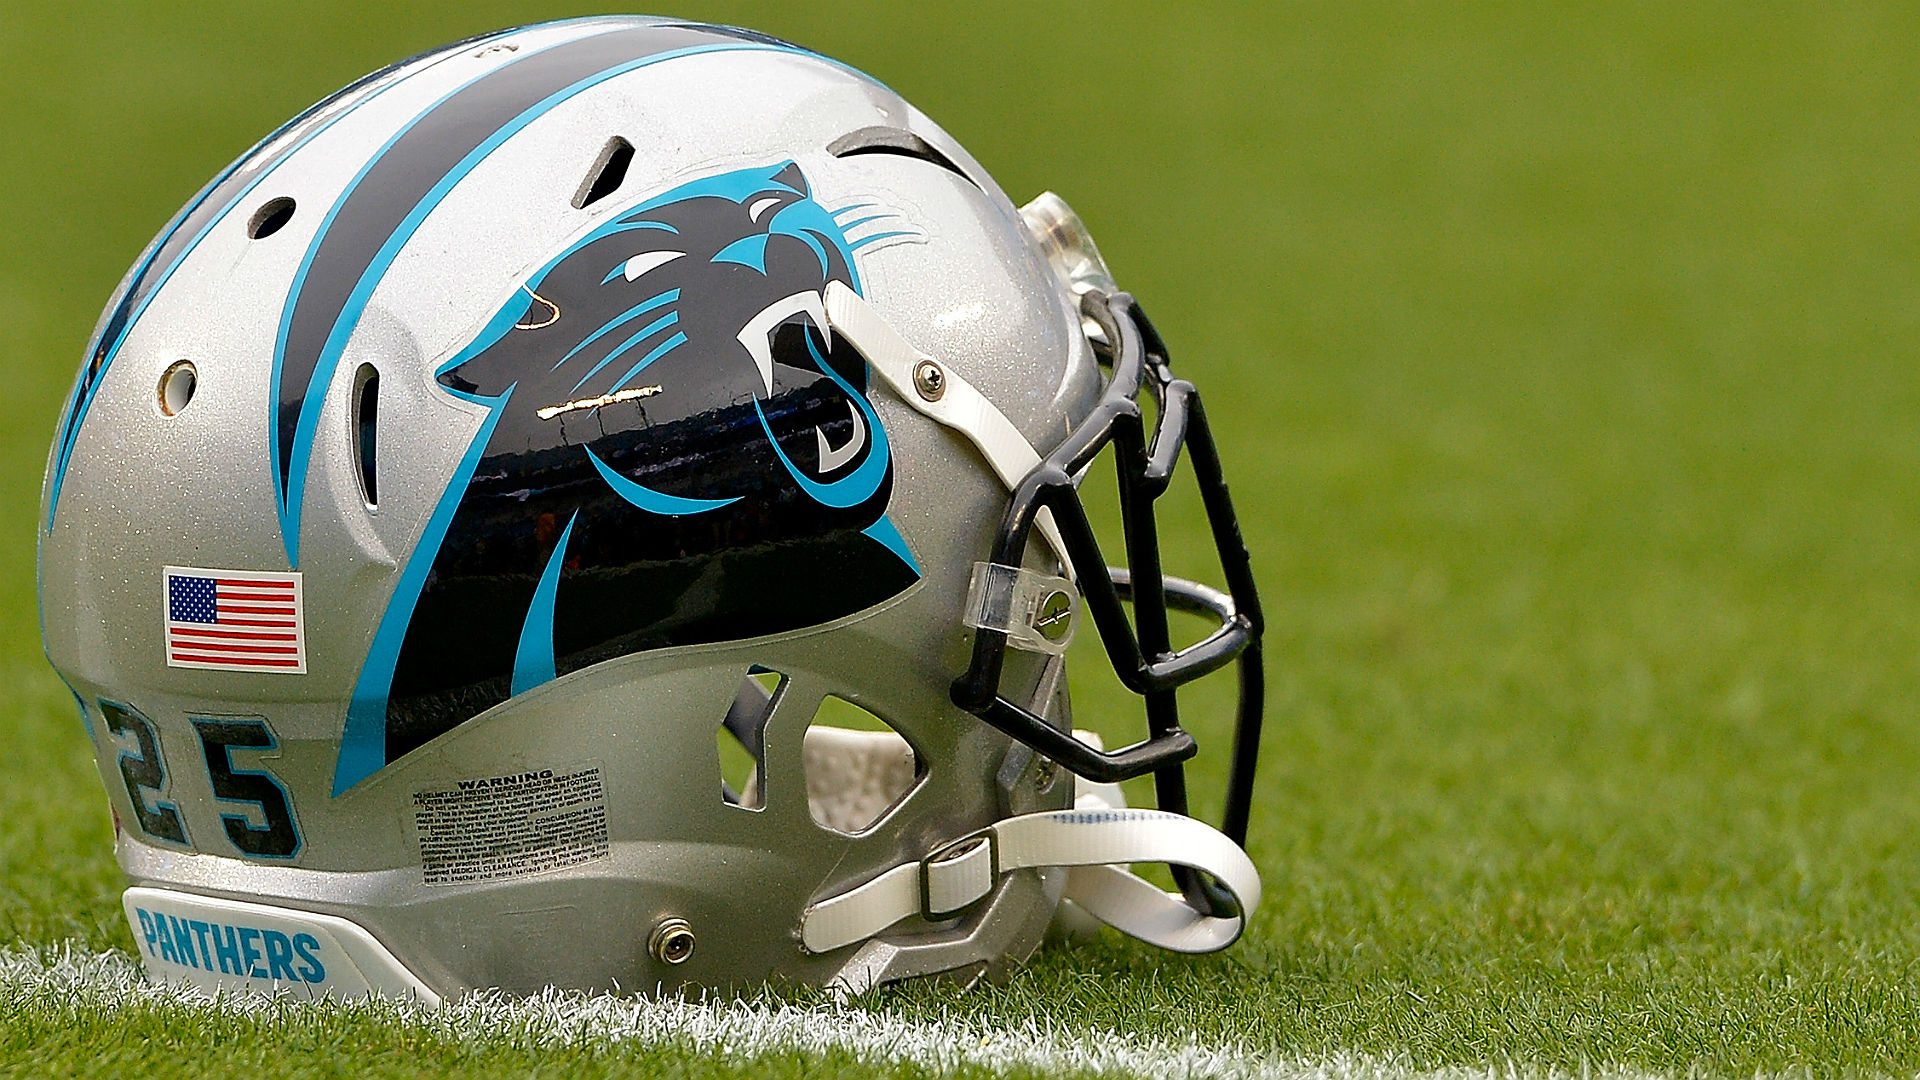 NFL trade rumors: Panthers acquire OT Corey Robinson from Lions